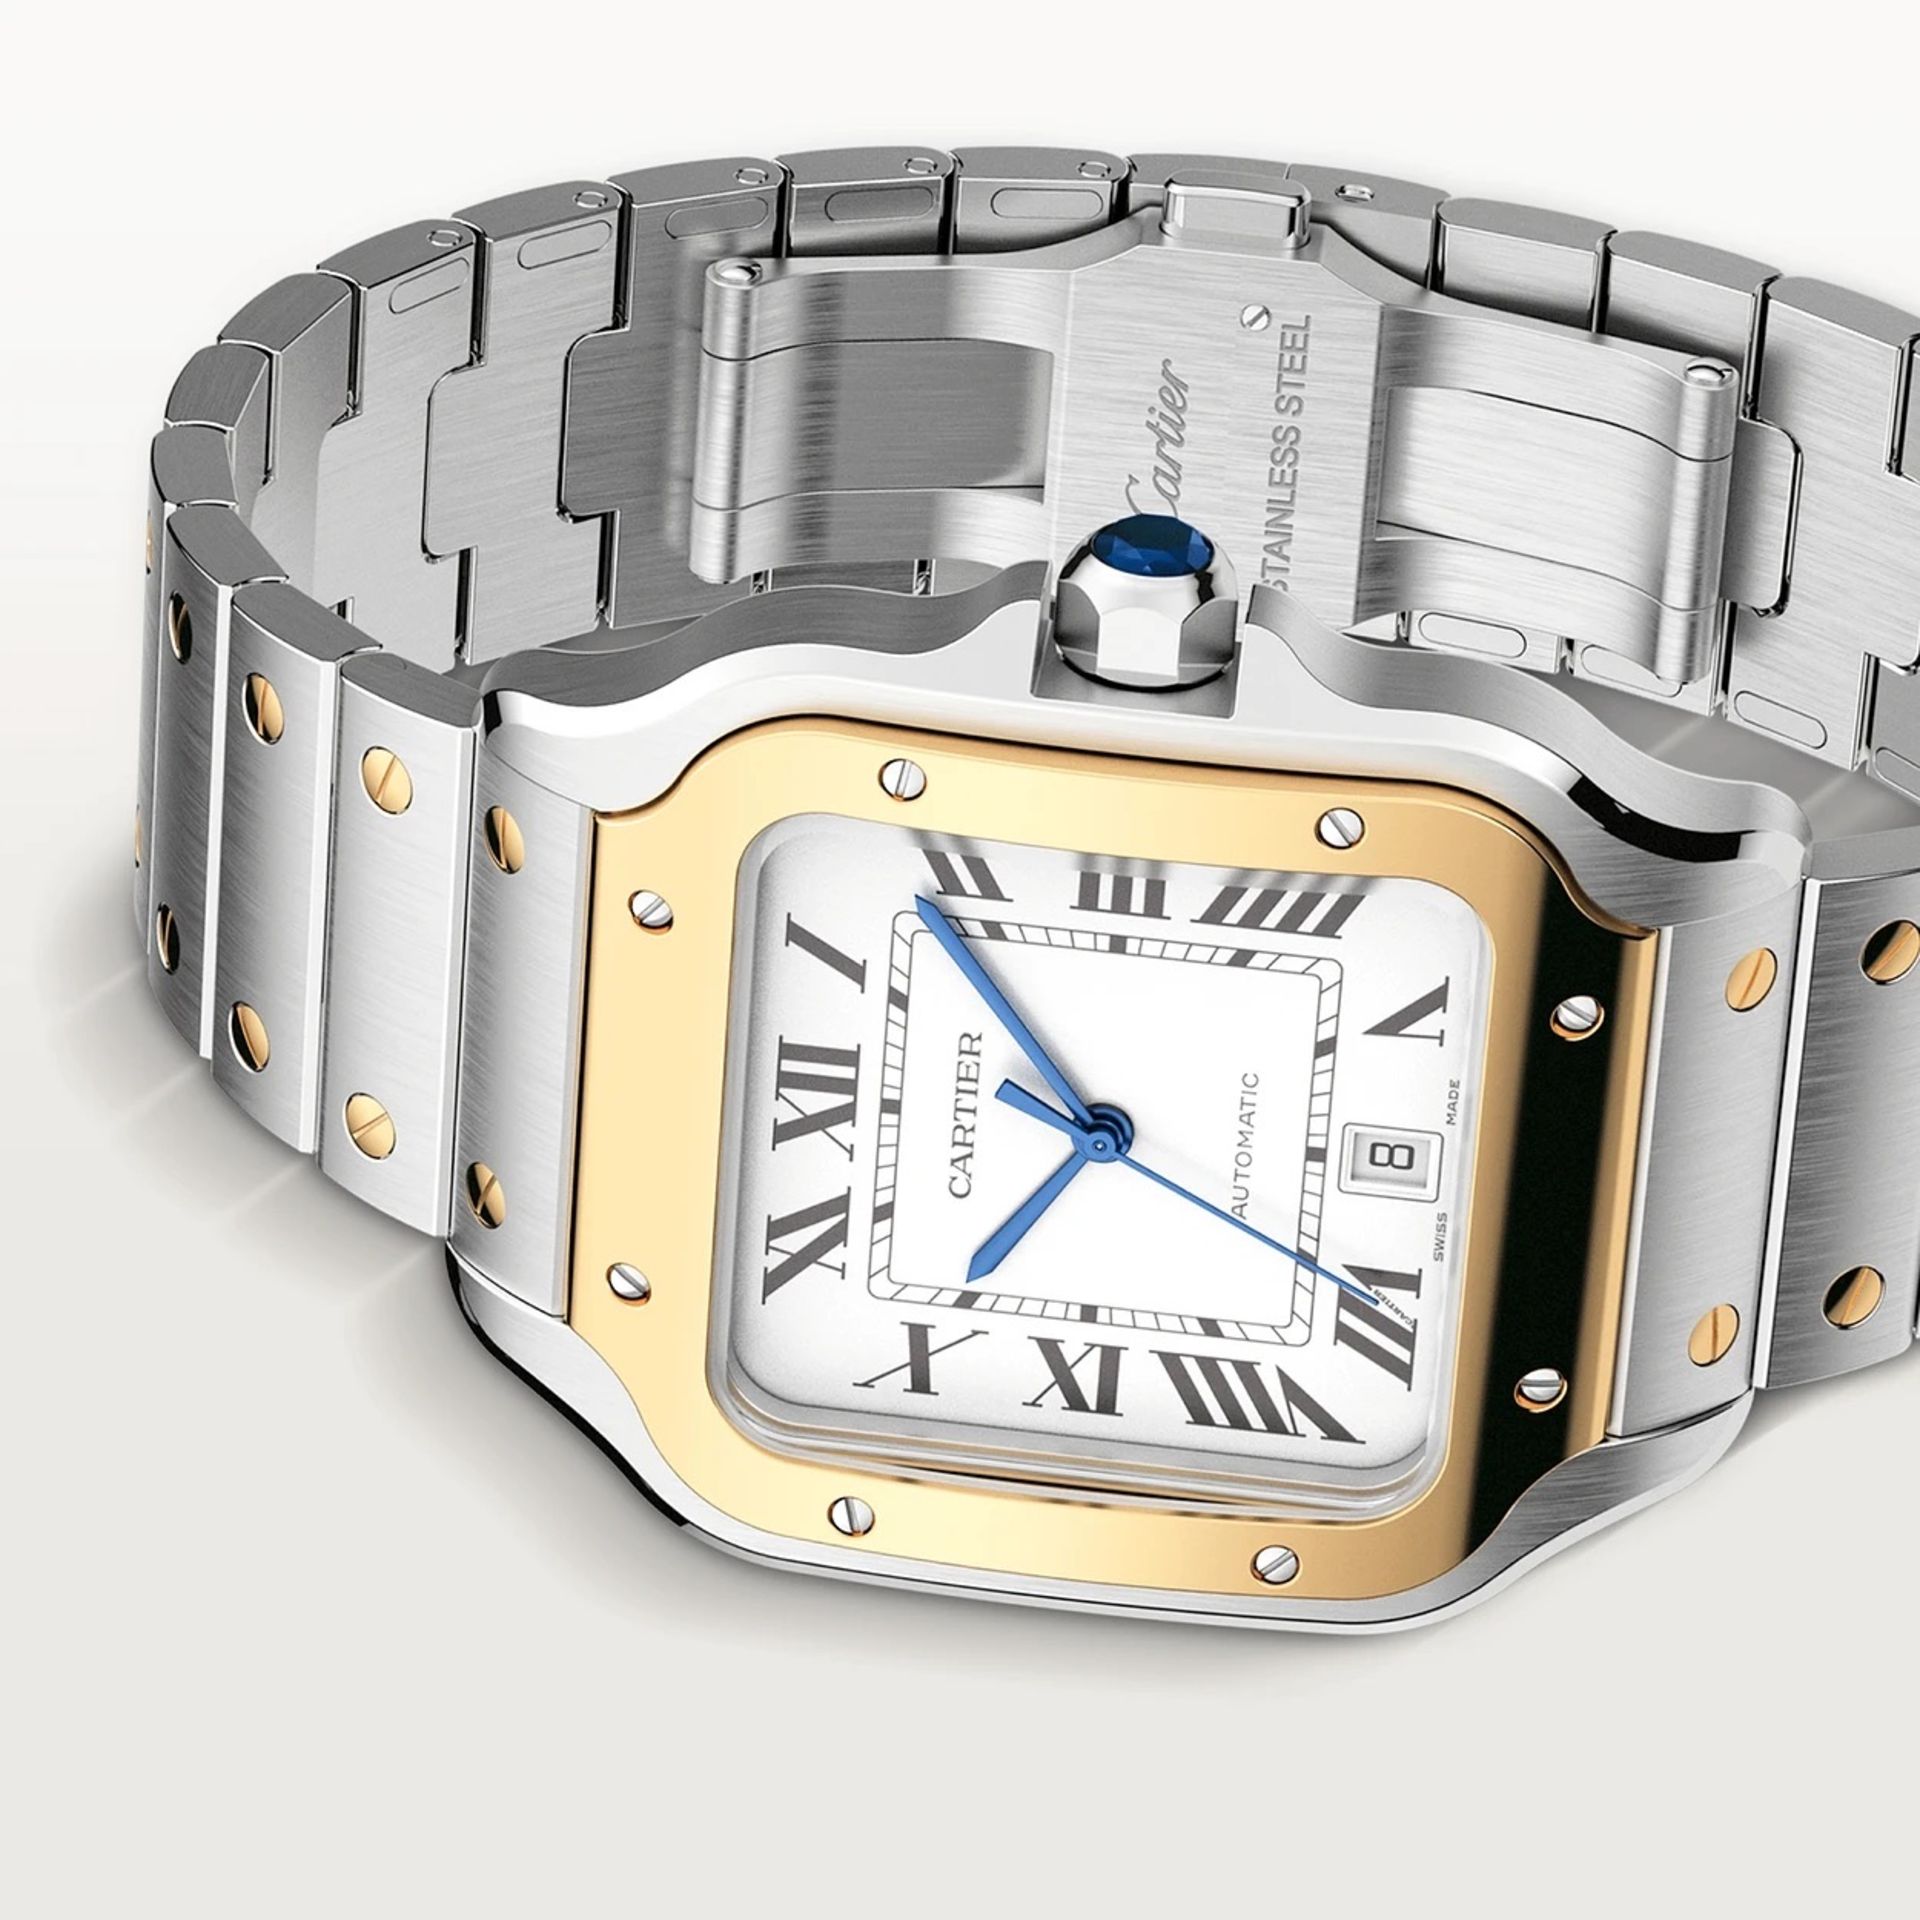 Cartier Santos De Cartier Large Model - Automatic Movement - Yellow Gold Stainless Steel White Dial - Image 4 of 12